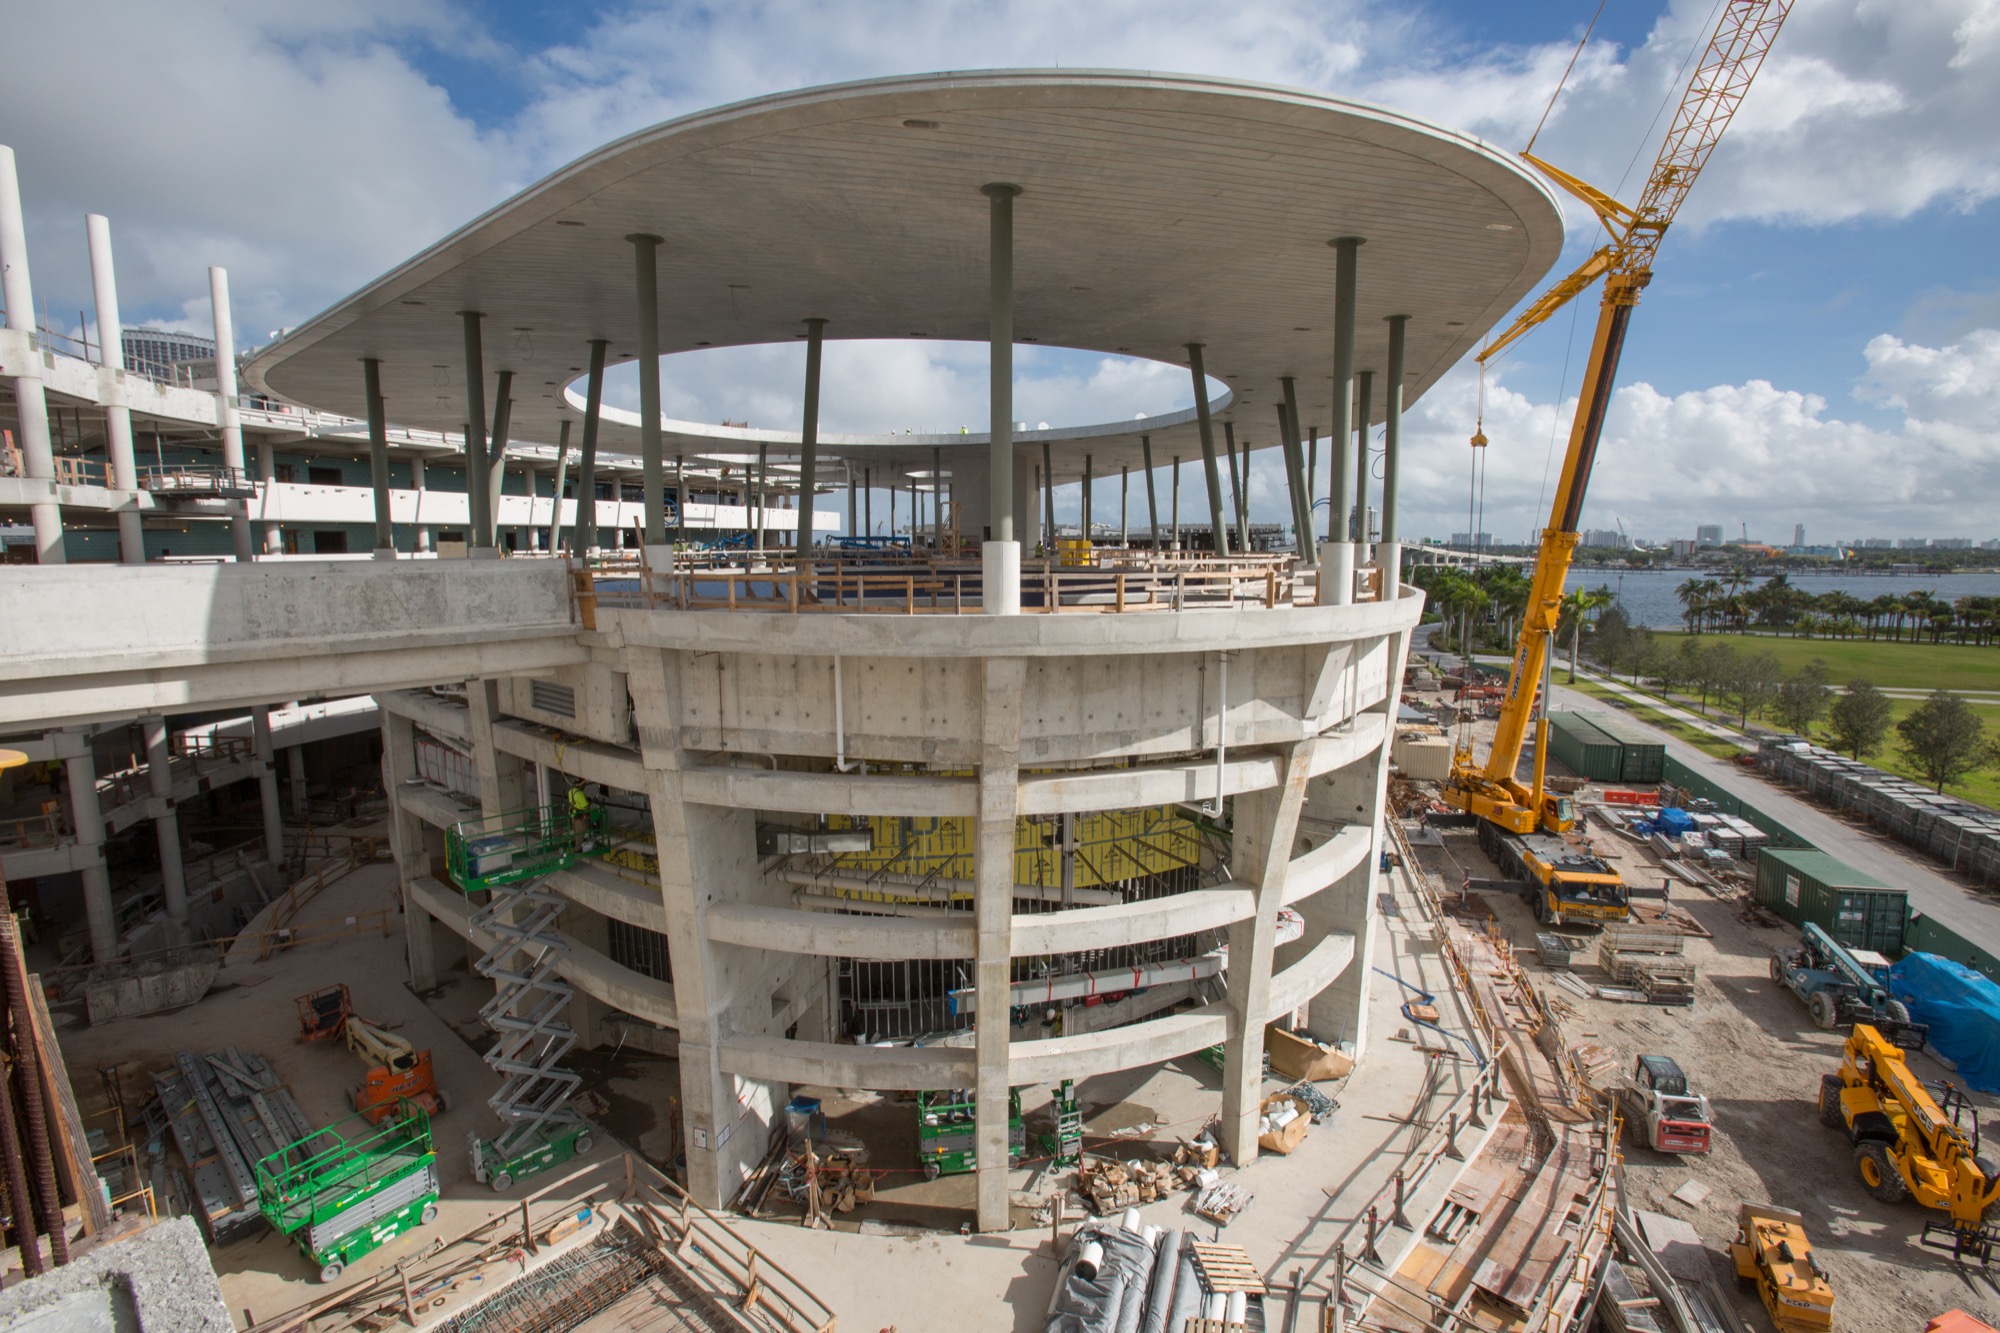 Check Out This Time-Lapse Video of the Frost Museum of Science’s Construction